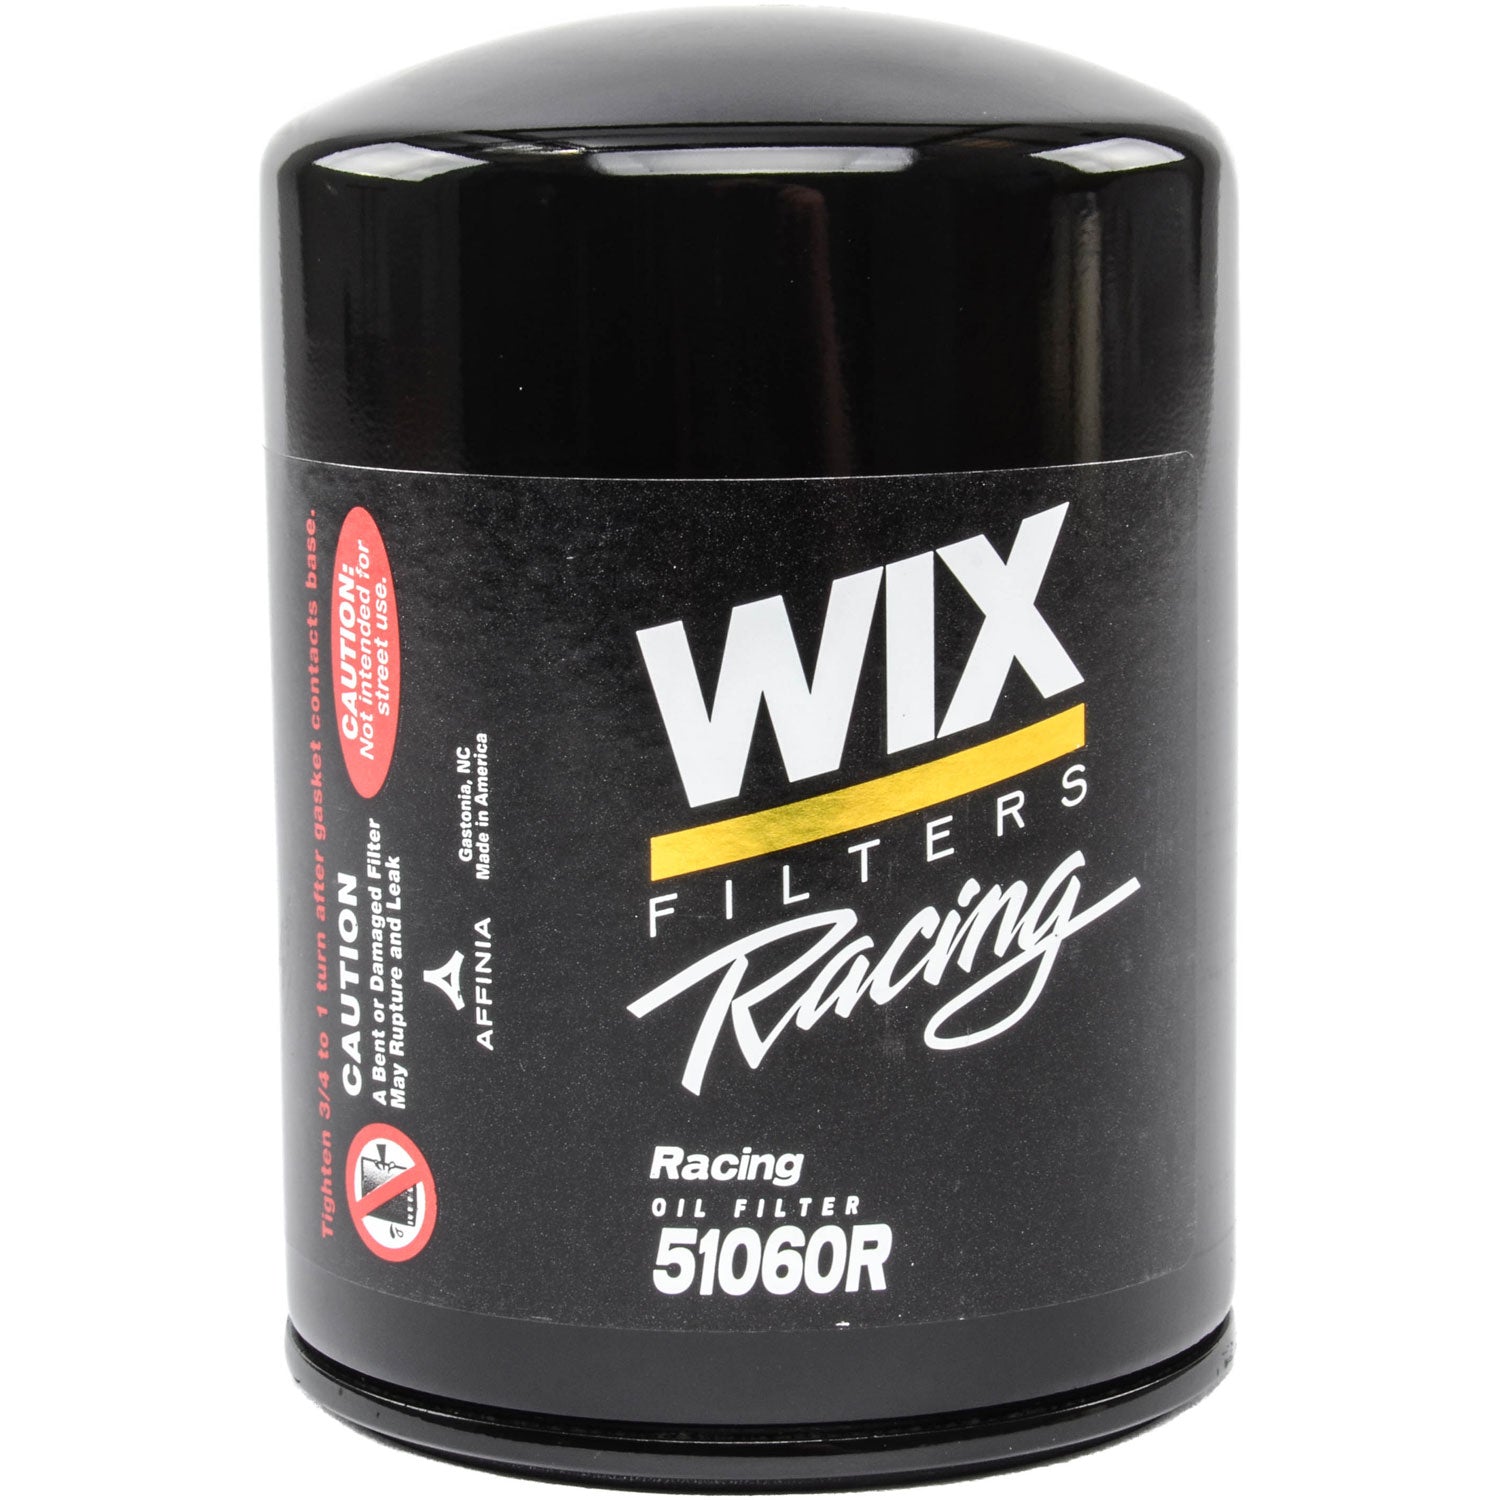 WIX 51060R Racing Oil Filter - for GTR Applications w/Alpha Oil Filter Adapter - Race Application Photo-1 